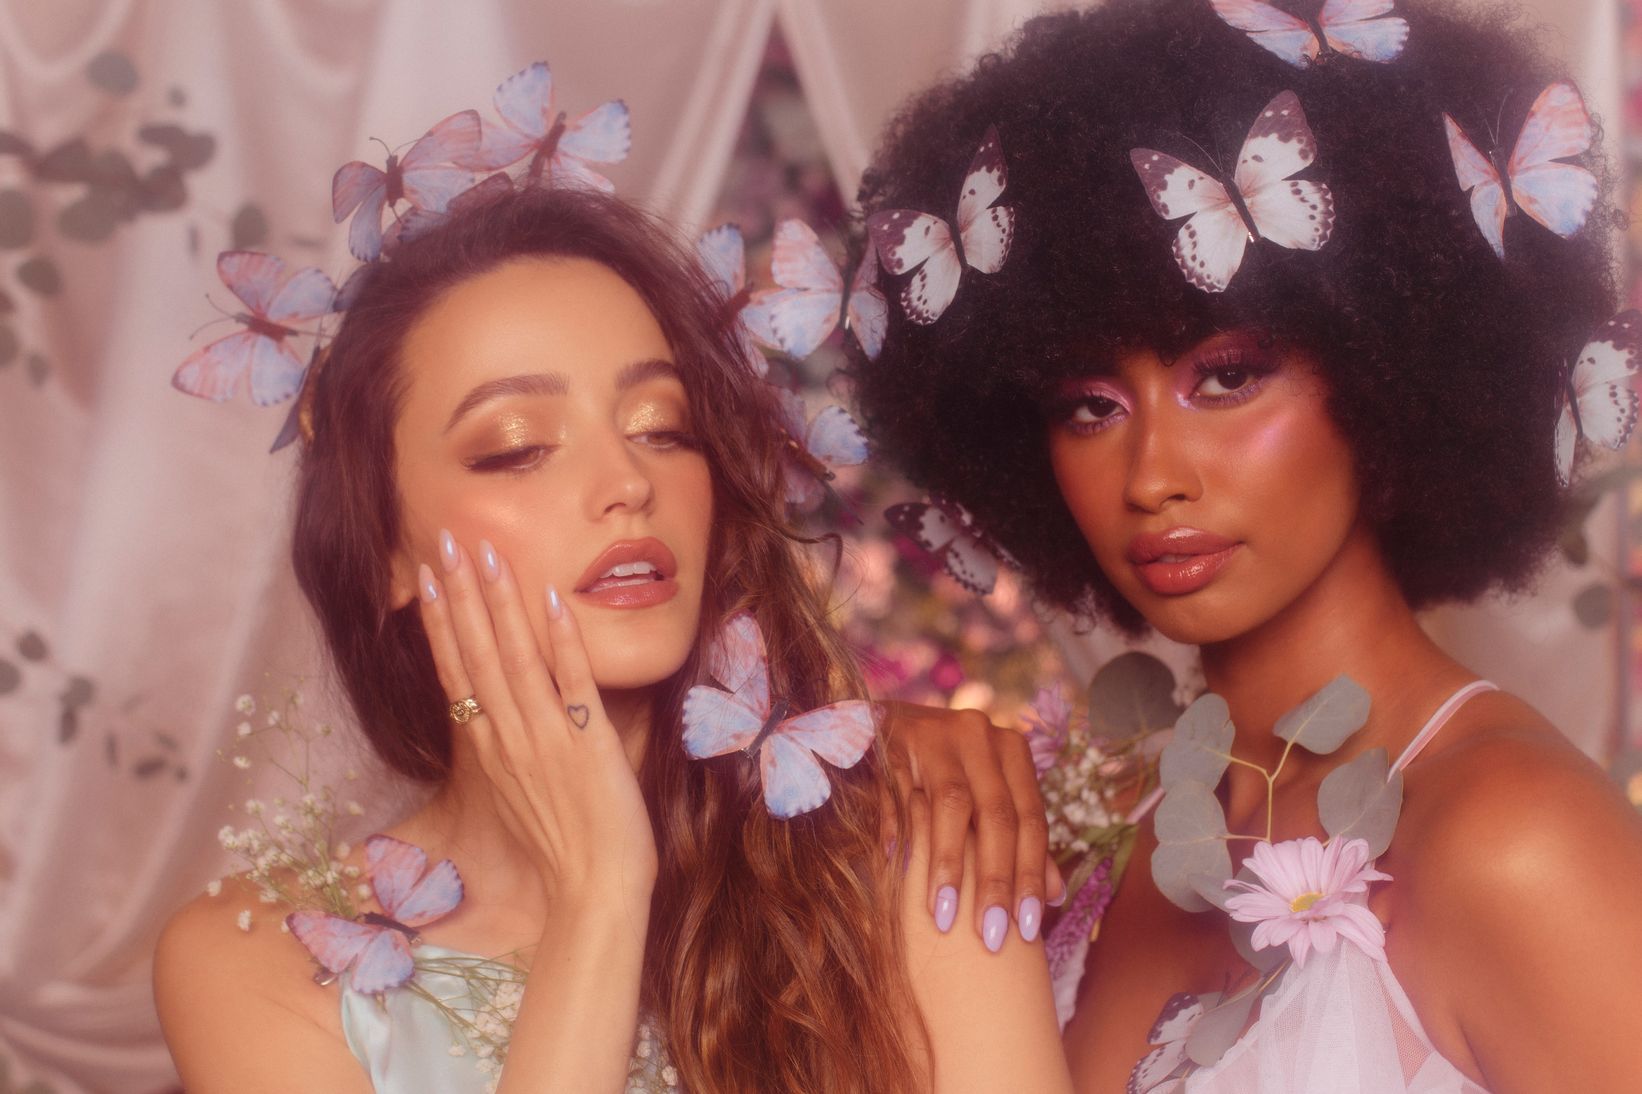 KathleenLights wearing "One of Your French Girls"  and model wearing "Lilac Wine" from the Lights Lacquer "It was All a Dream" spring 2021 collection.